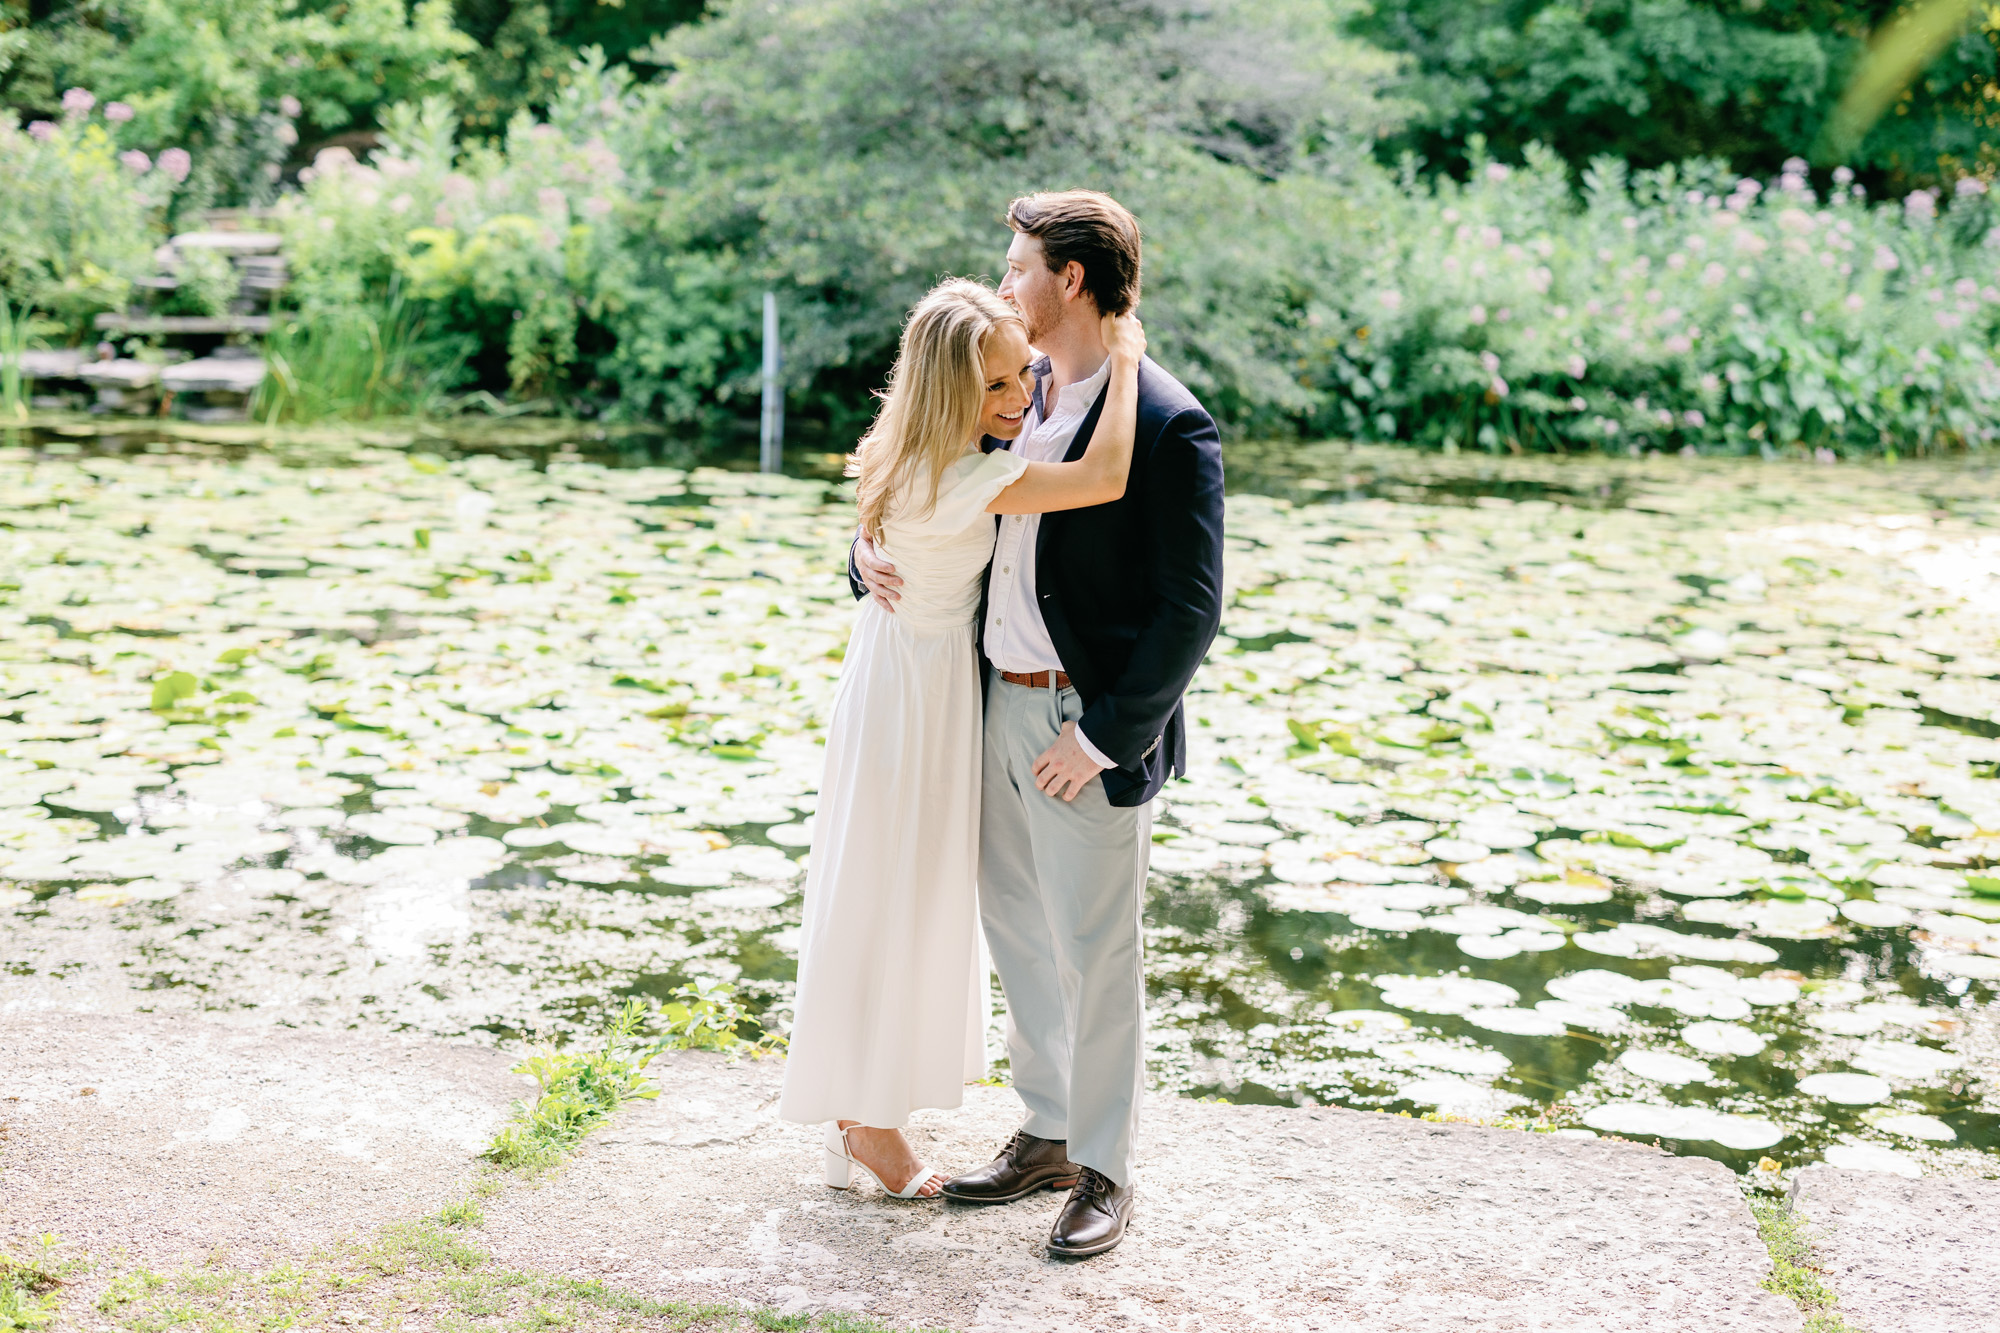 Alfred Caldwell Lily Pool engagement photo.